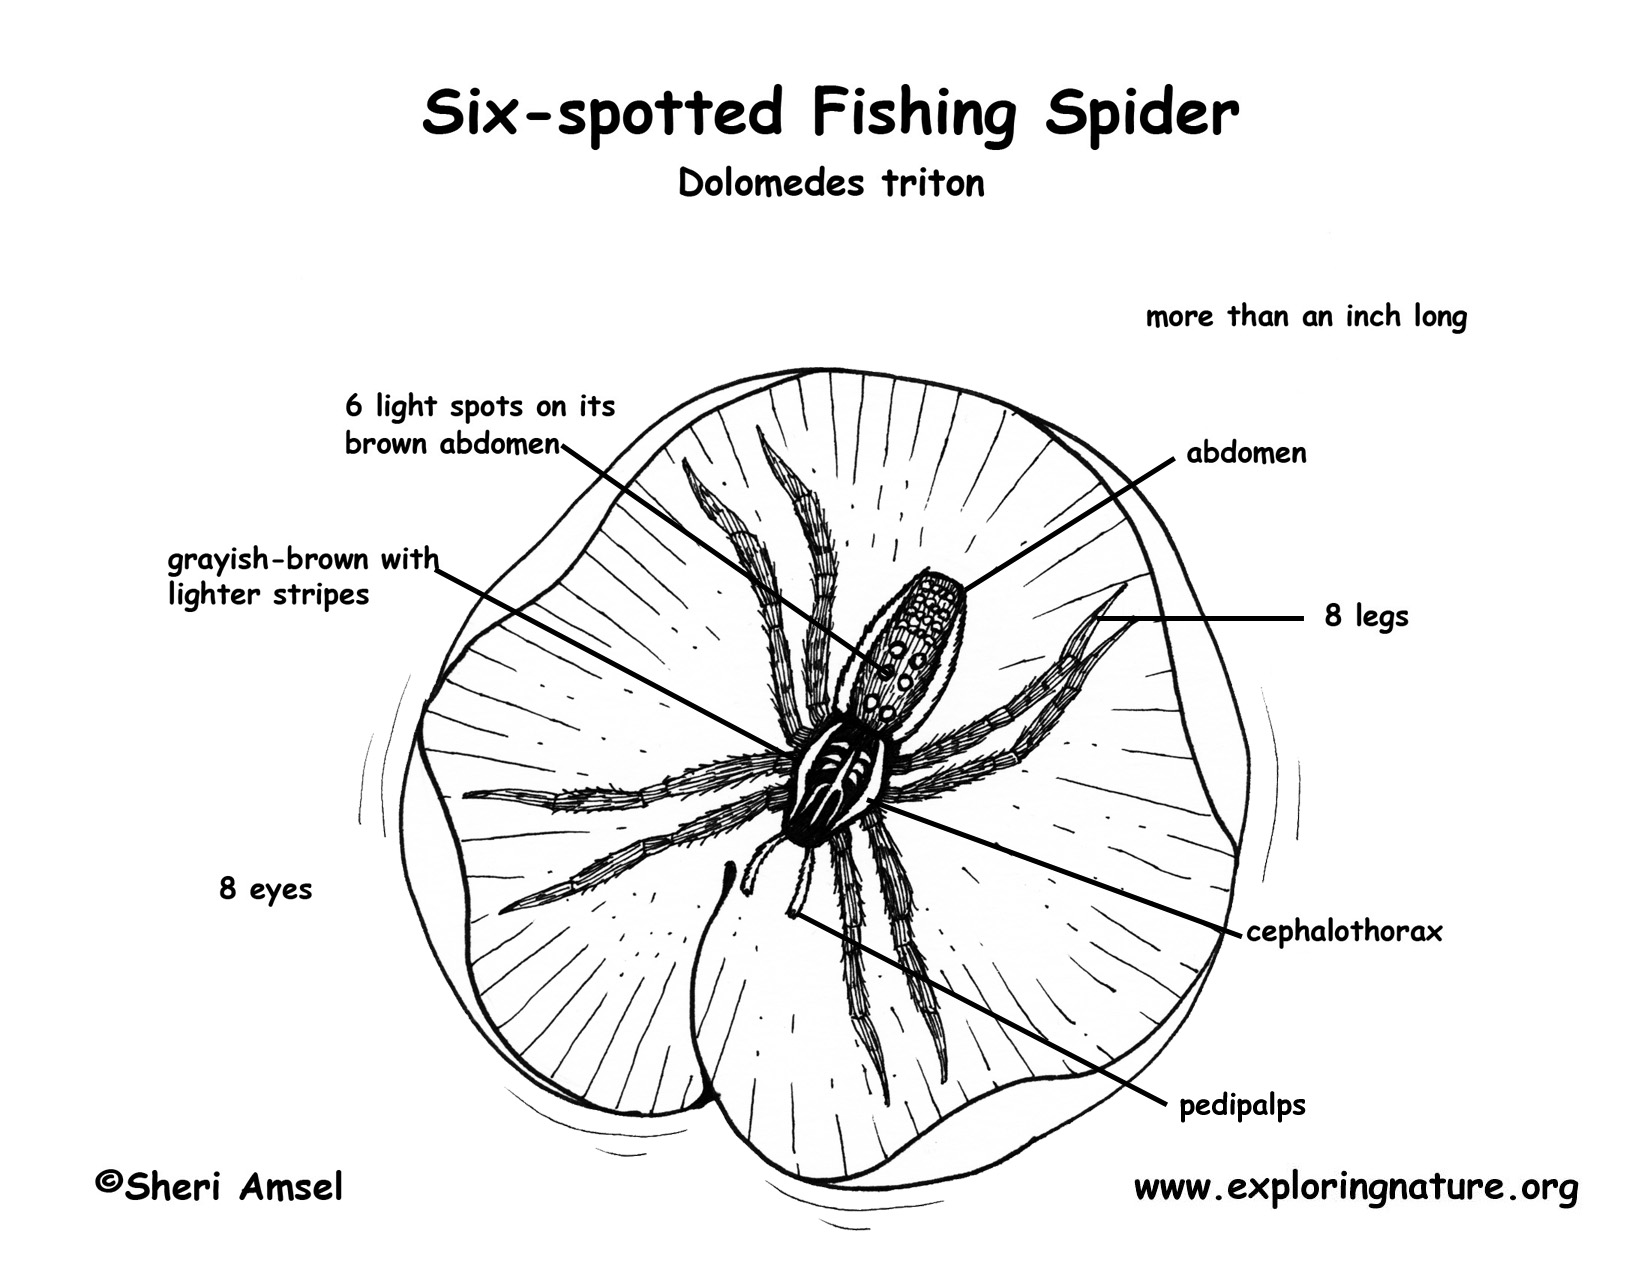 Spider (Six-spotted Fishing)